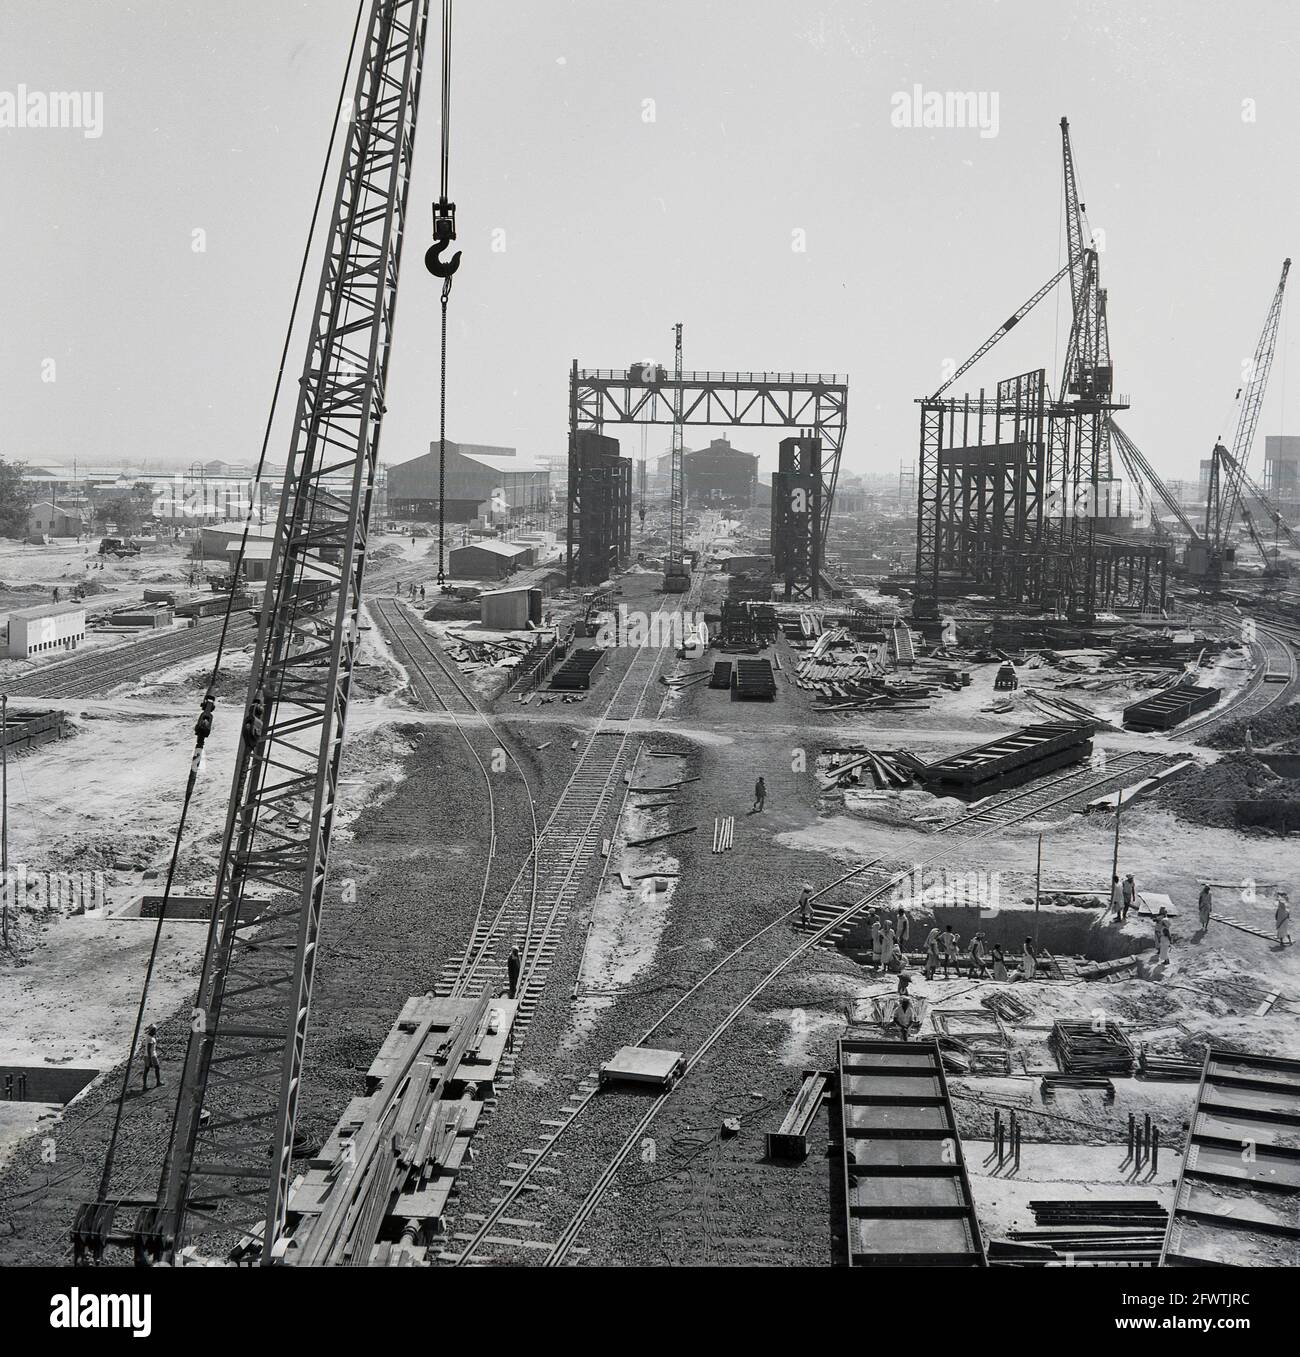 Late 1950s, historical, aerial view of the construction of the giant Durgapur Steel Plant, Durgapur, West Bengal, India, After independence, the steel plant was one of the first major construction projects in India and in 1957 an indian company, Patel Engineering, in collaboration with a British business, Cementation UK, undertook the entire civil engineering and earth works. The massive industrial complex, involved building and machinery foundations, concrete piles, building structure, railway tracks, roads and servces such as drainage and a water supply. Stock Photo